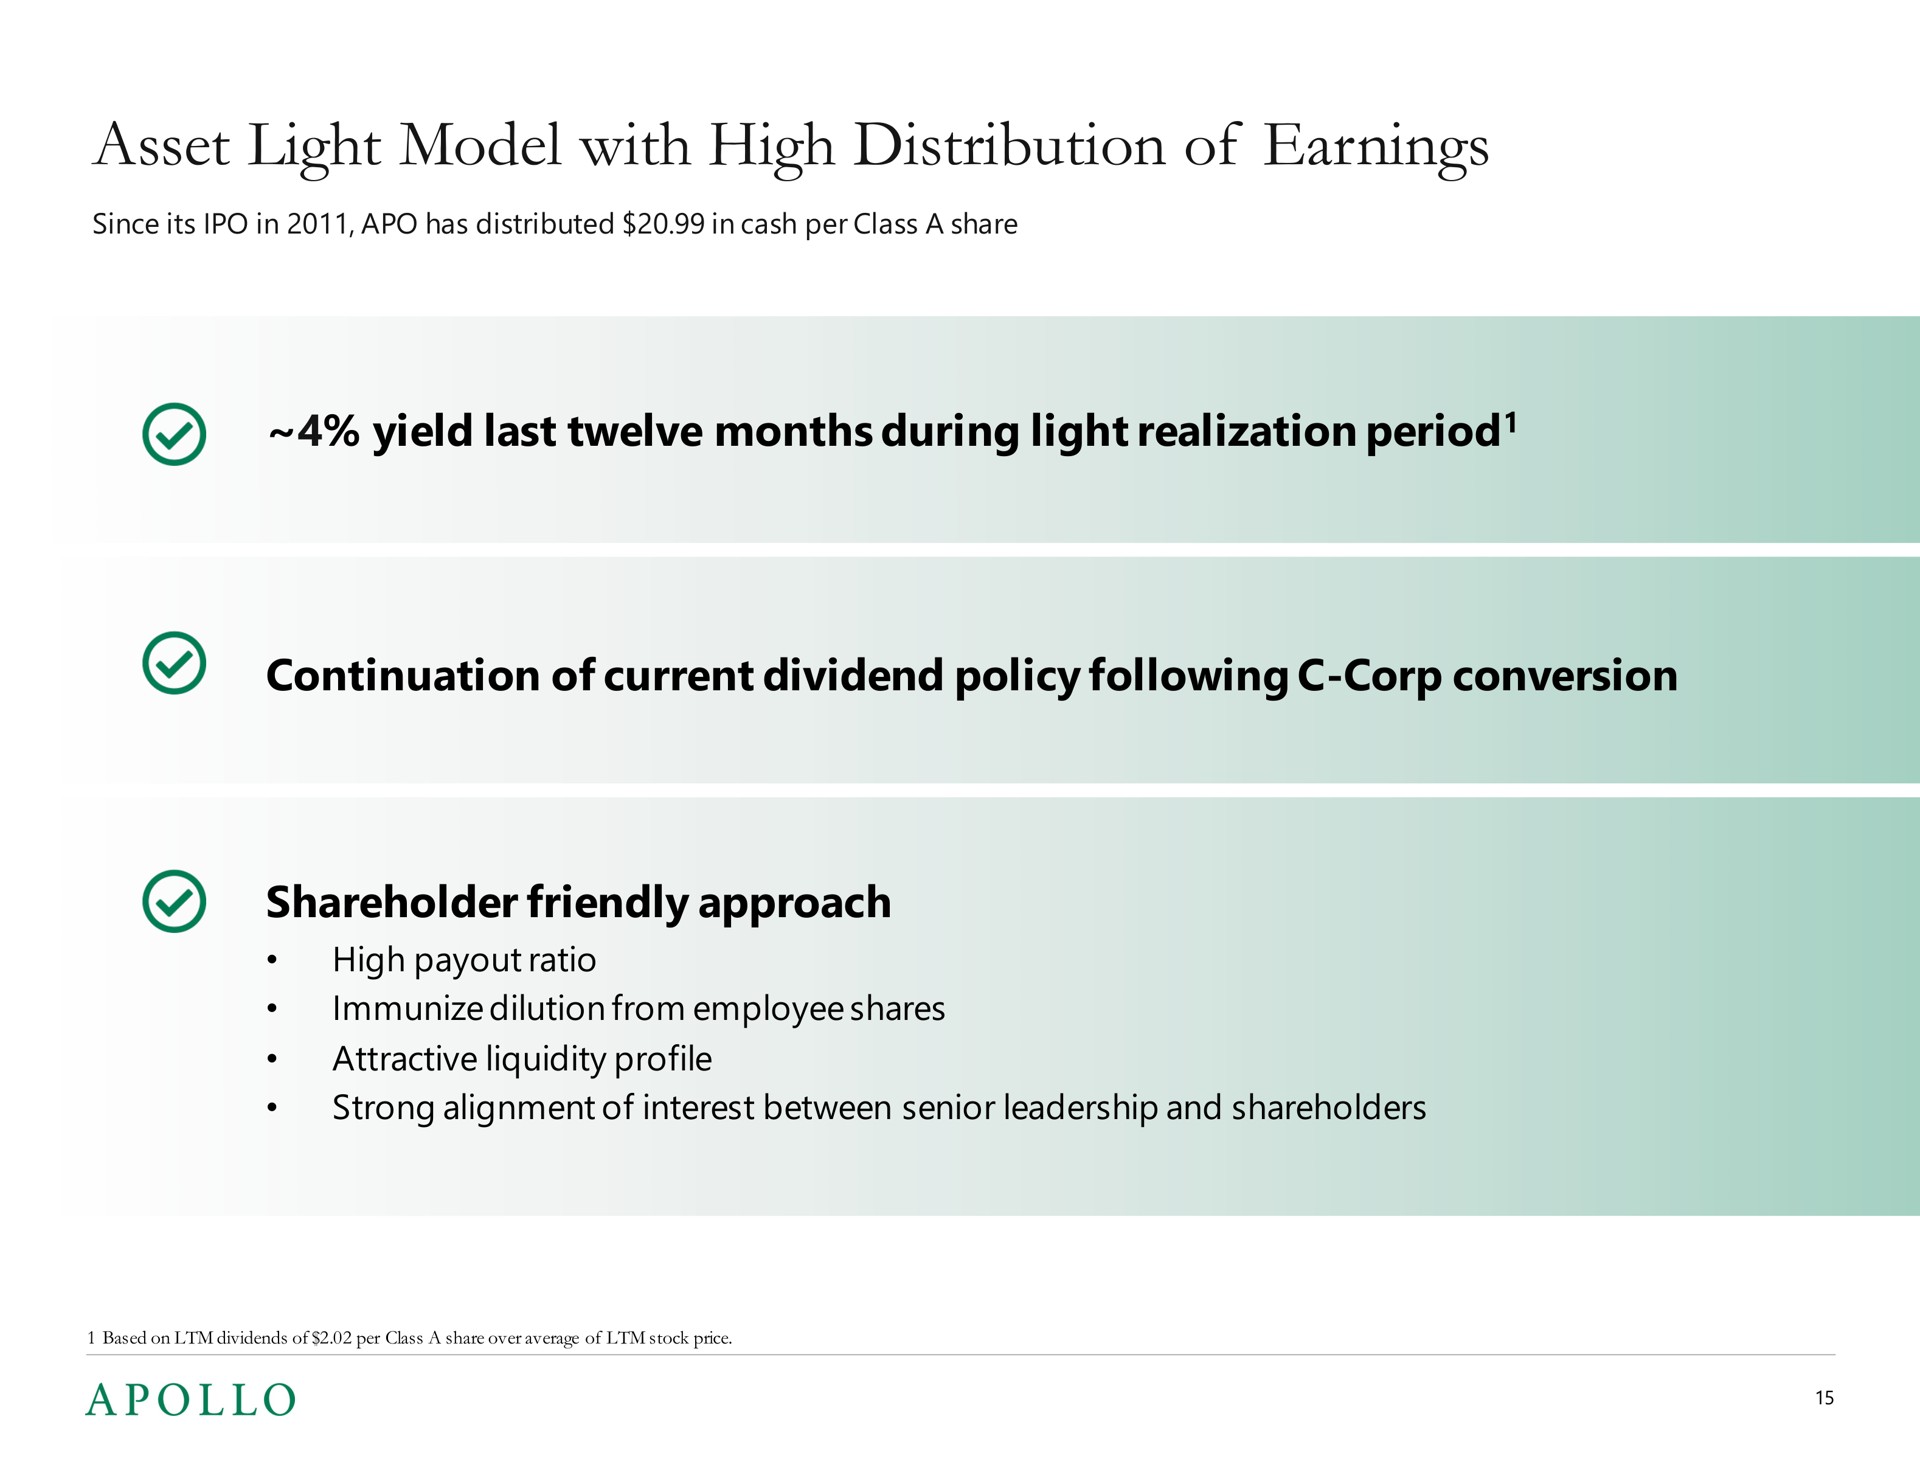 asset light model with high distribution of earnings yield last twelve months during light realization period continuation of current dividend policy following corp conversion shareholder friendly approach period ratio immunize dilution from employee shares attractive liquidity profile strong alignment interest between senior leadership and shareholders | Apollo Global Management